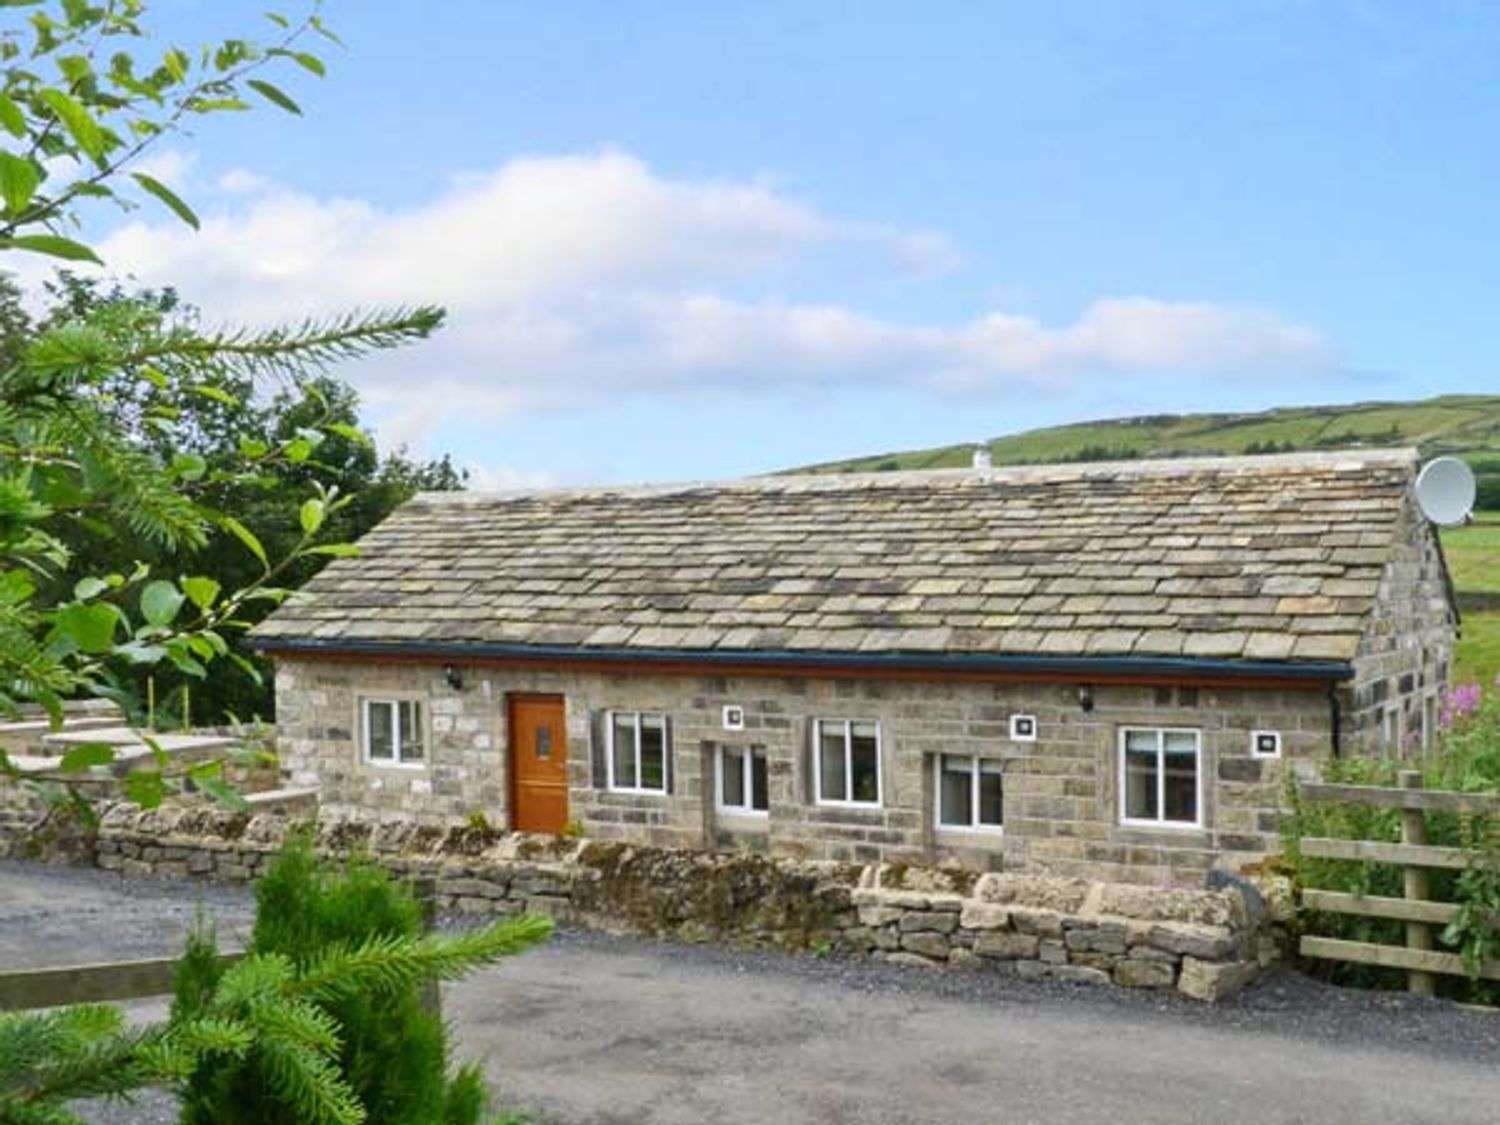 pack-horse-stables-yorkshire-dales